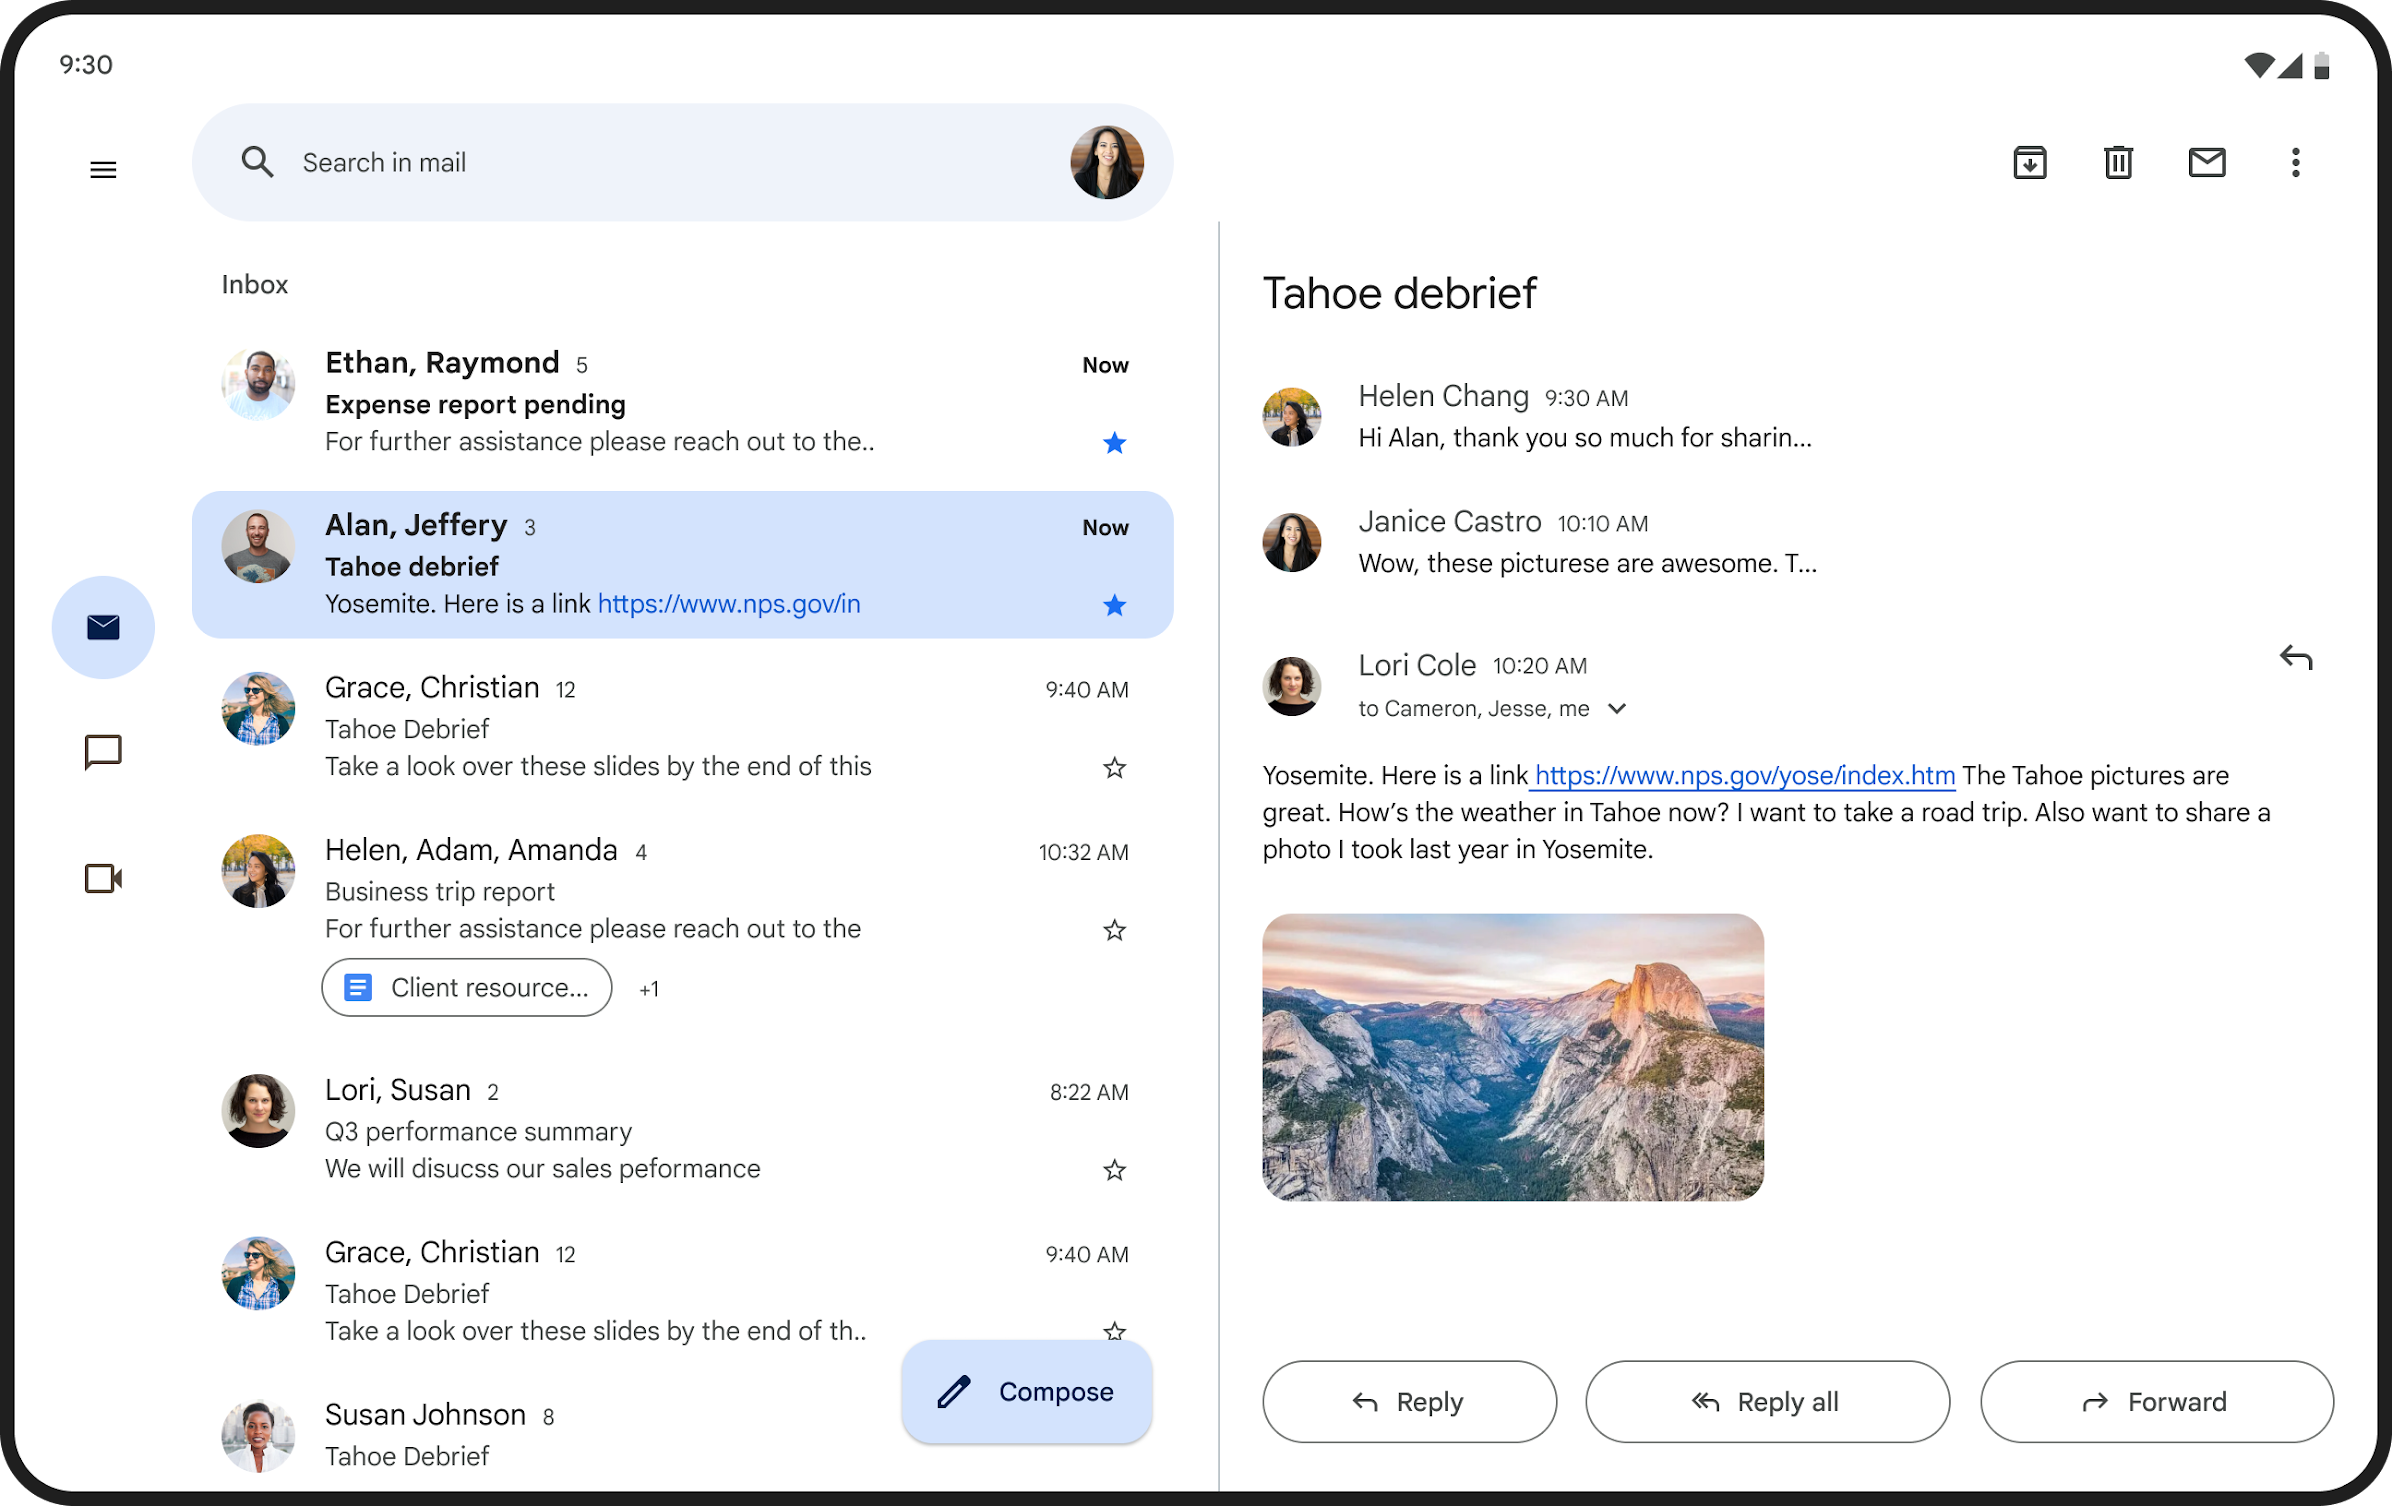 Google Workspace Updates: Existing spaces organized by conversation topic  will be upgraded to the new in-line threaded experience by the end of Q1  2024